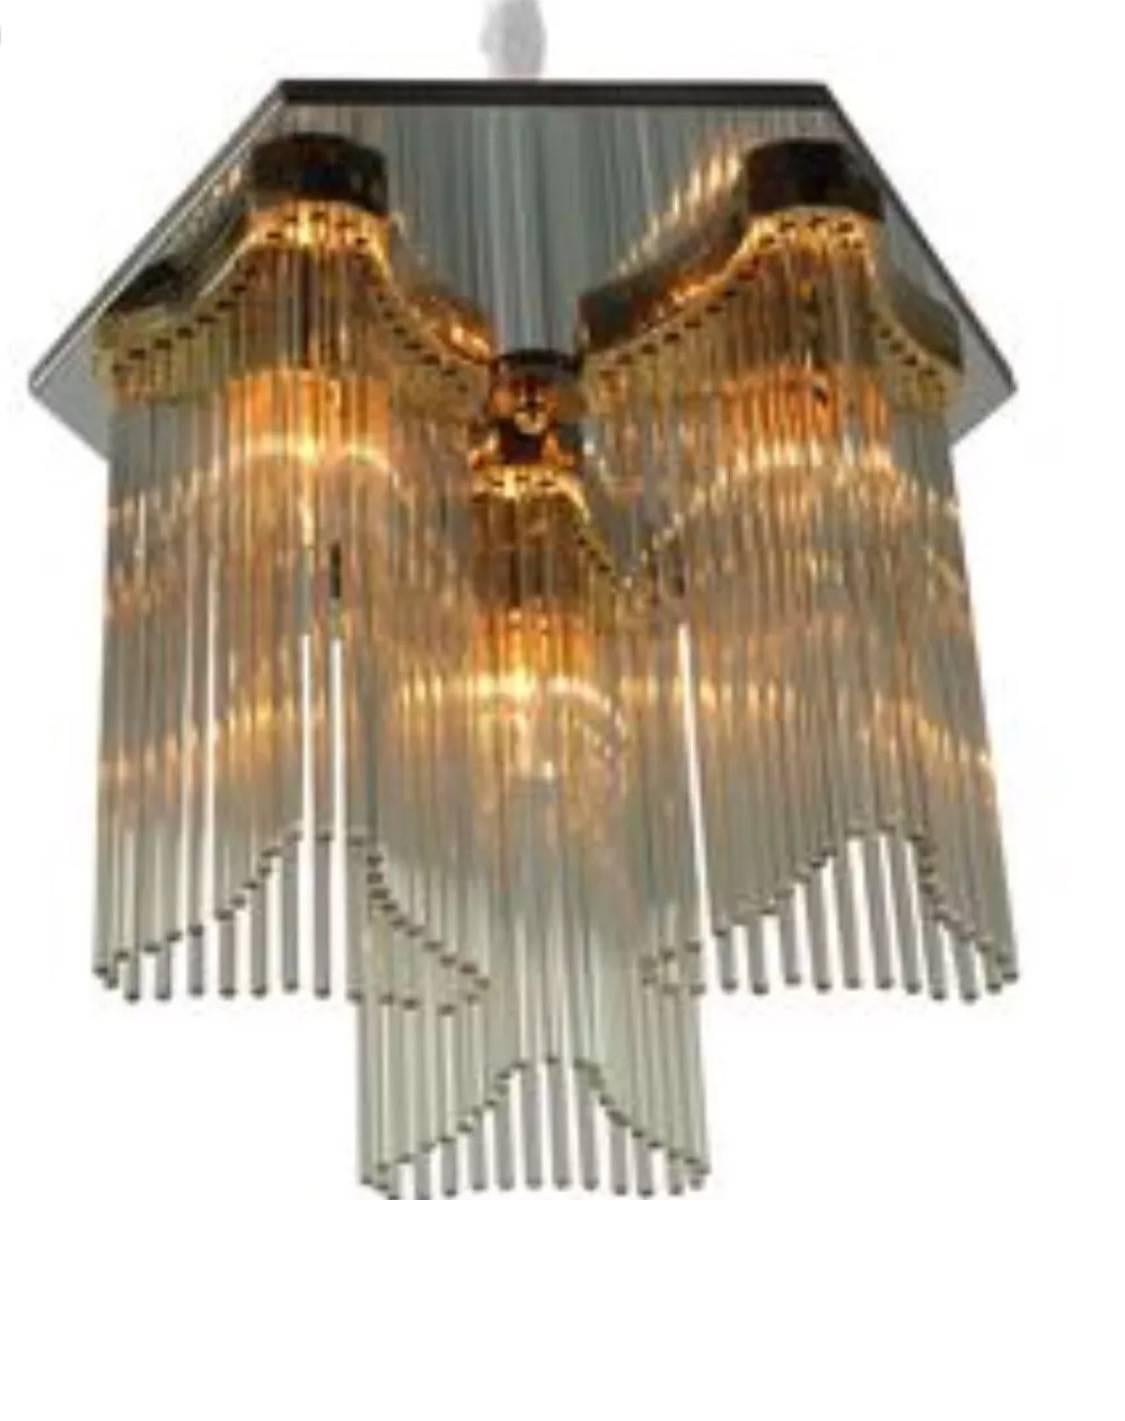 Sciolari triple lantern flush mount with glass rods, each one polished chrome top fitted with three brass-mounted hanging glass 12 inch rod 